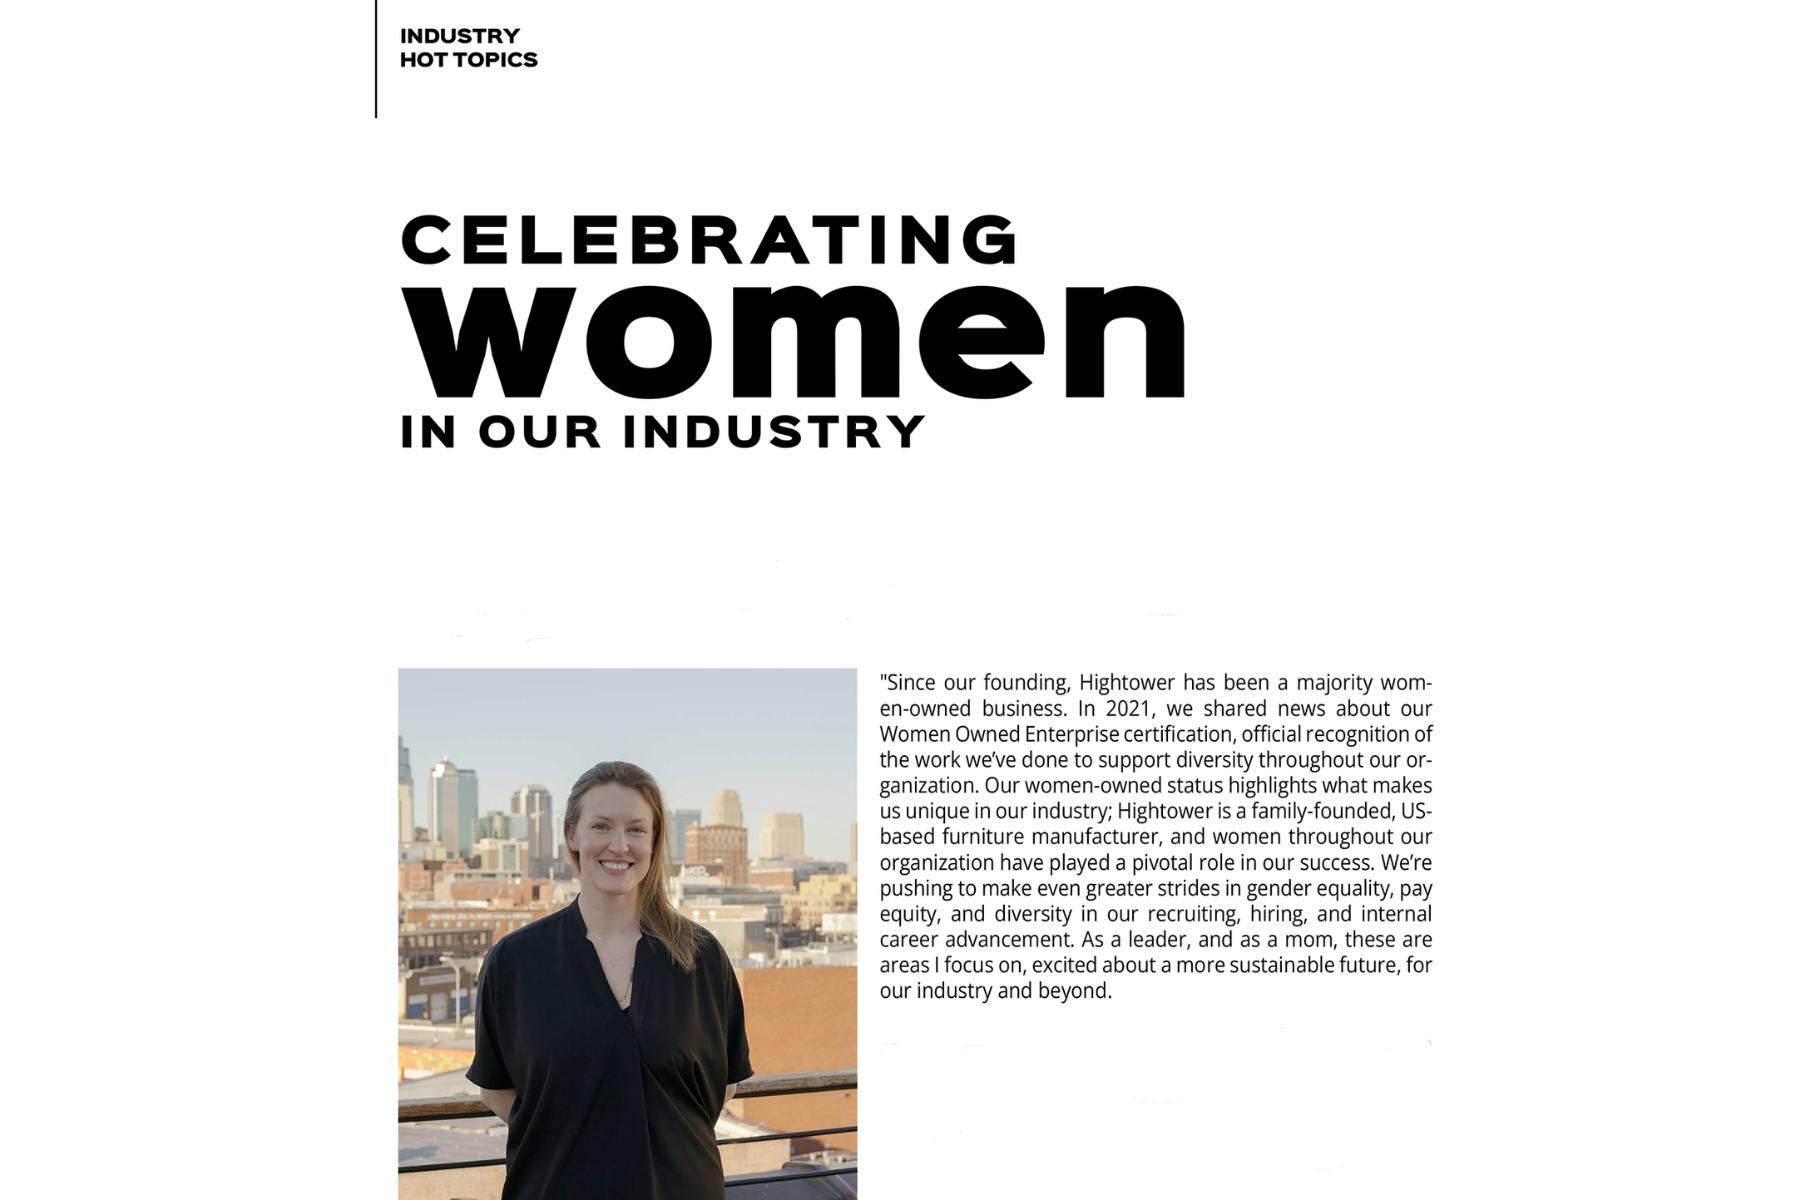 Celebrating Women in Our Industry